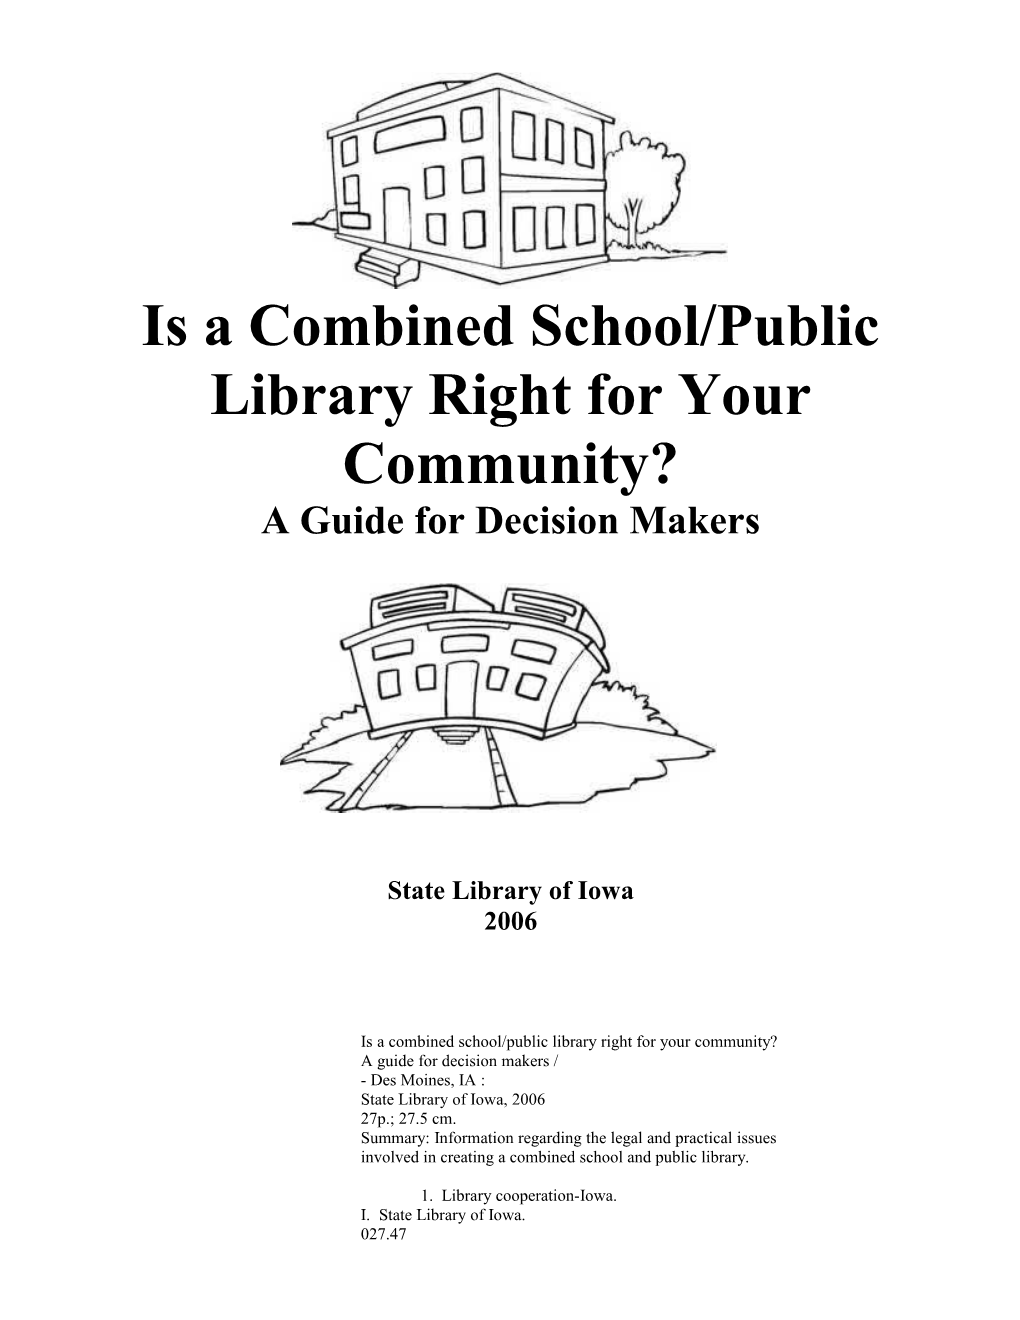 Is a Combined School/Public Library Right for Your Community?